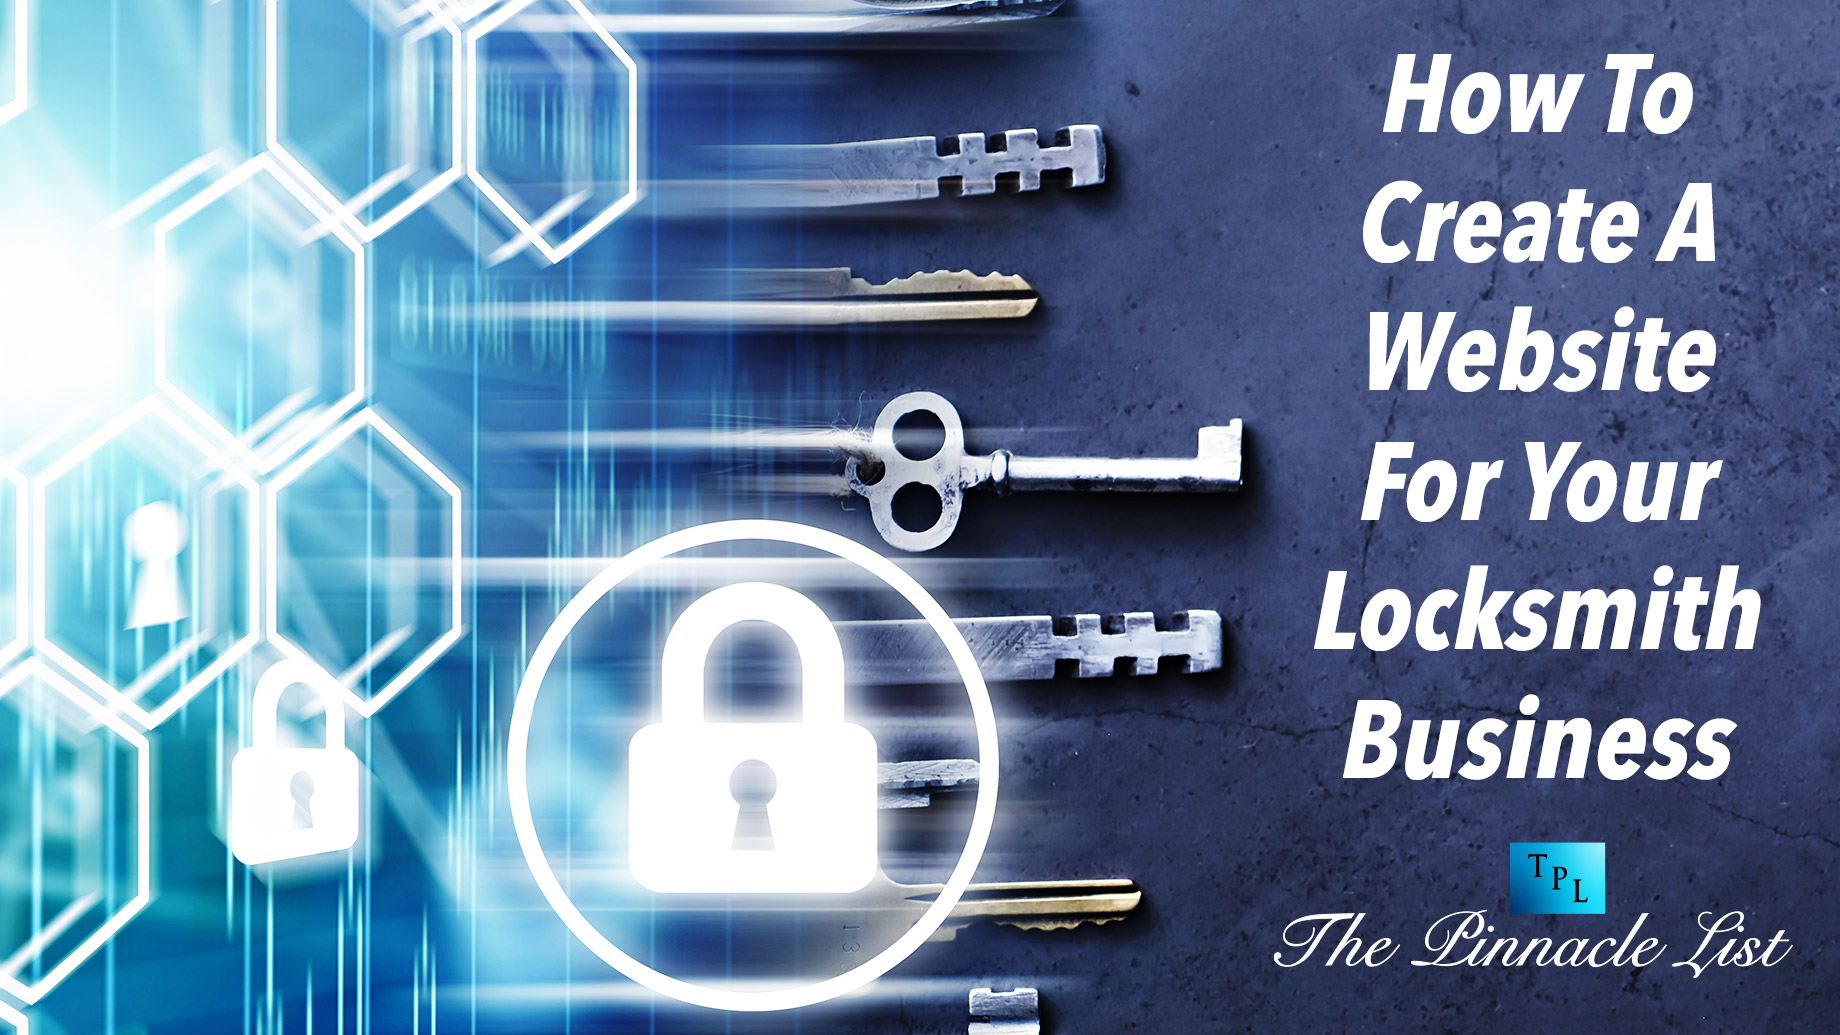 How To Create A Website For Your Locksmith Business